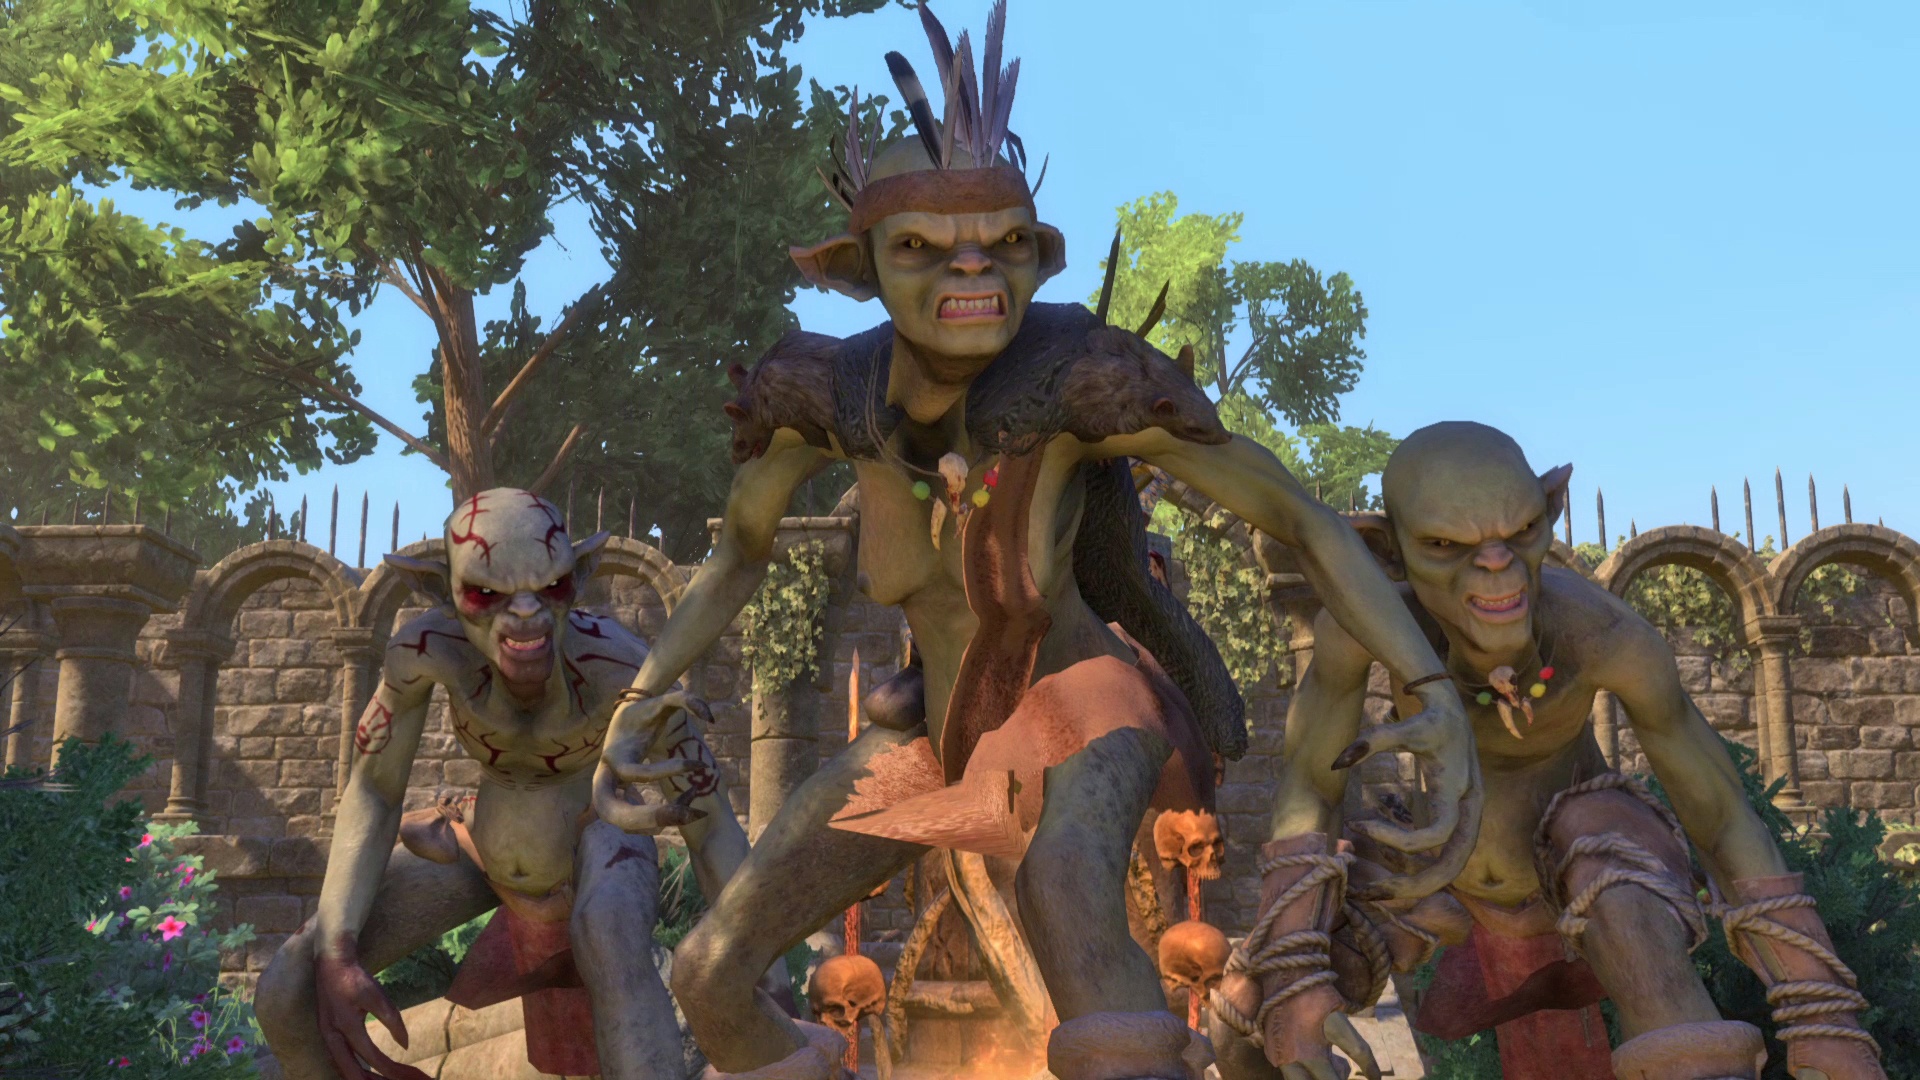 The Goblins are an example of modernised creature design.